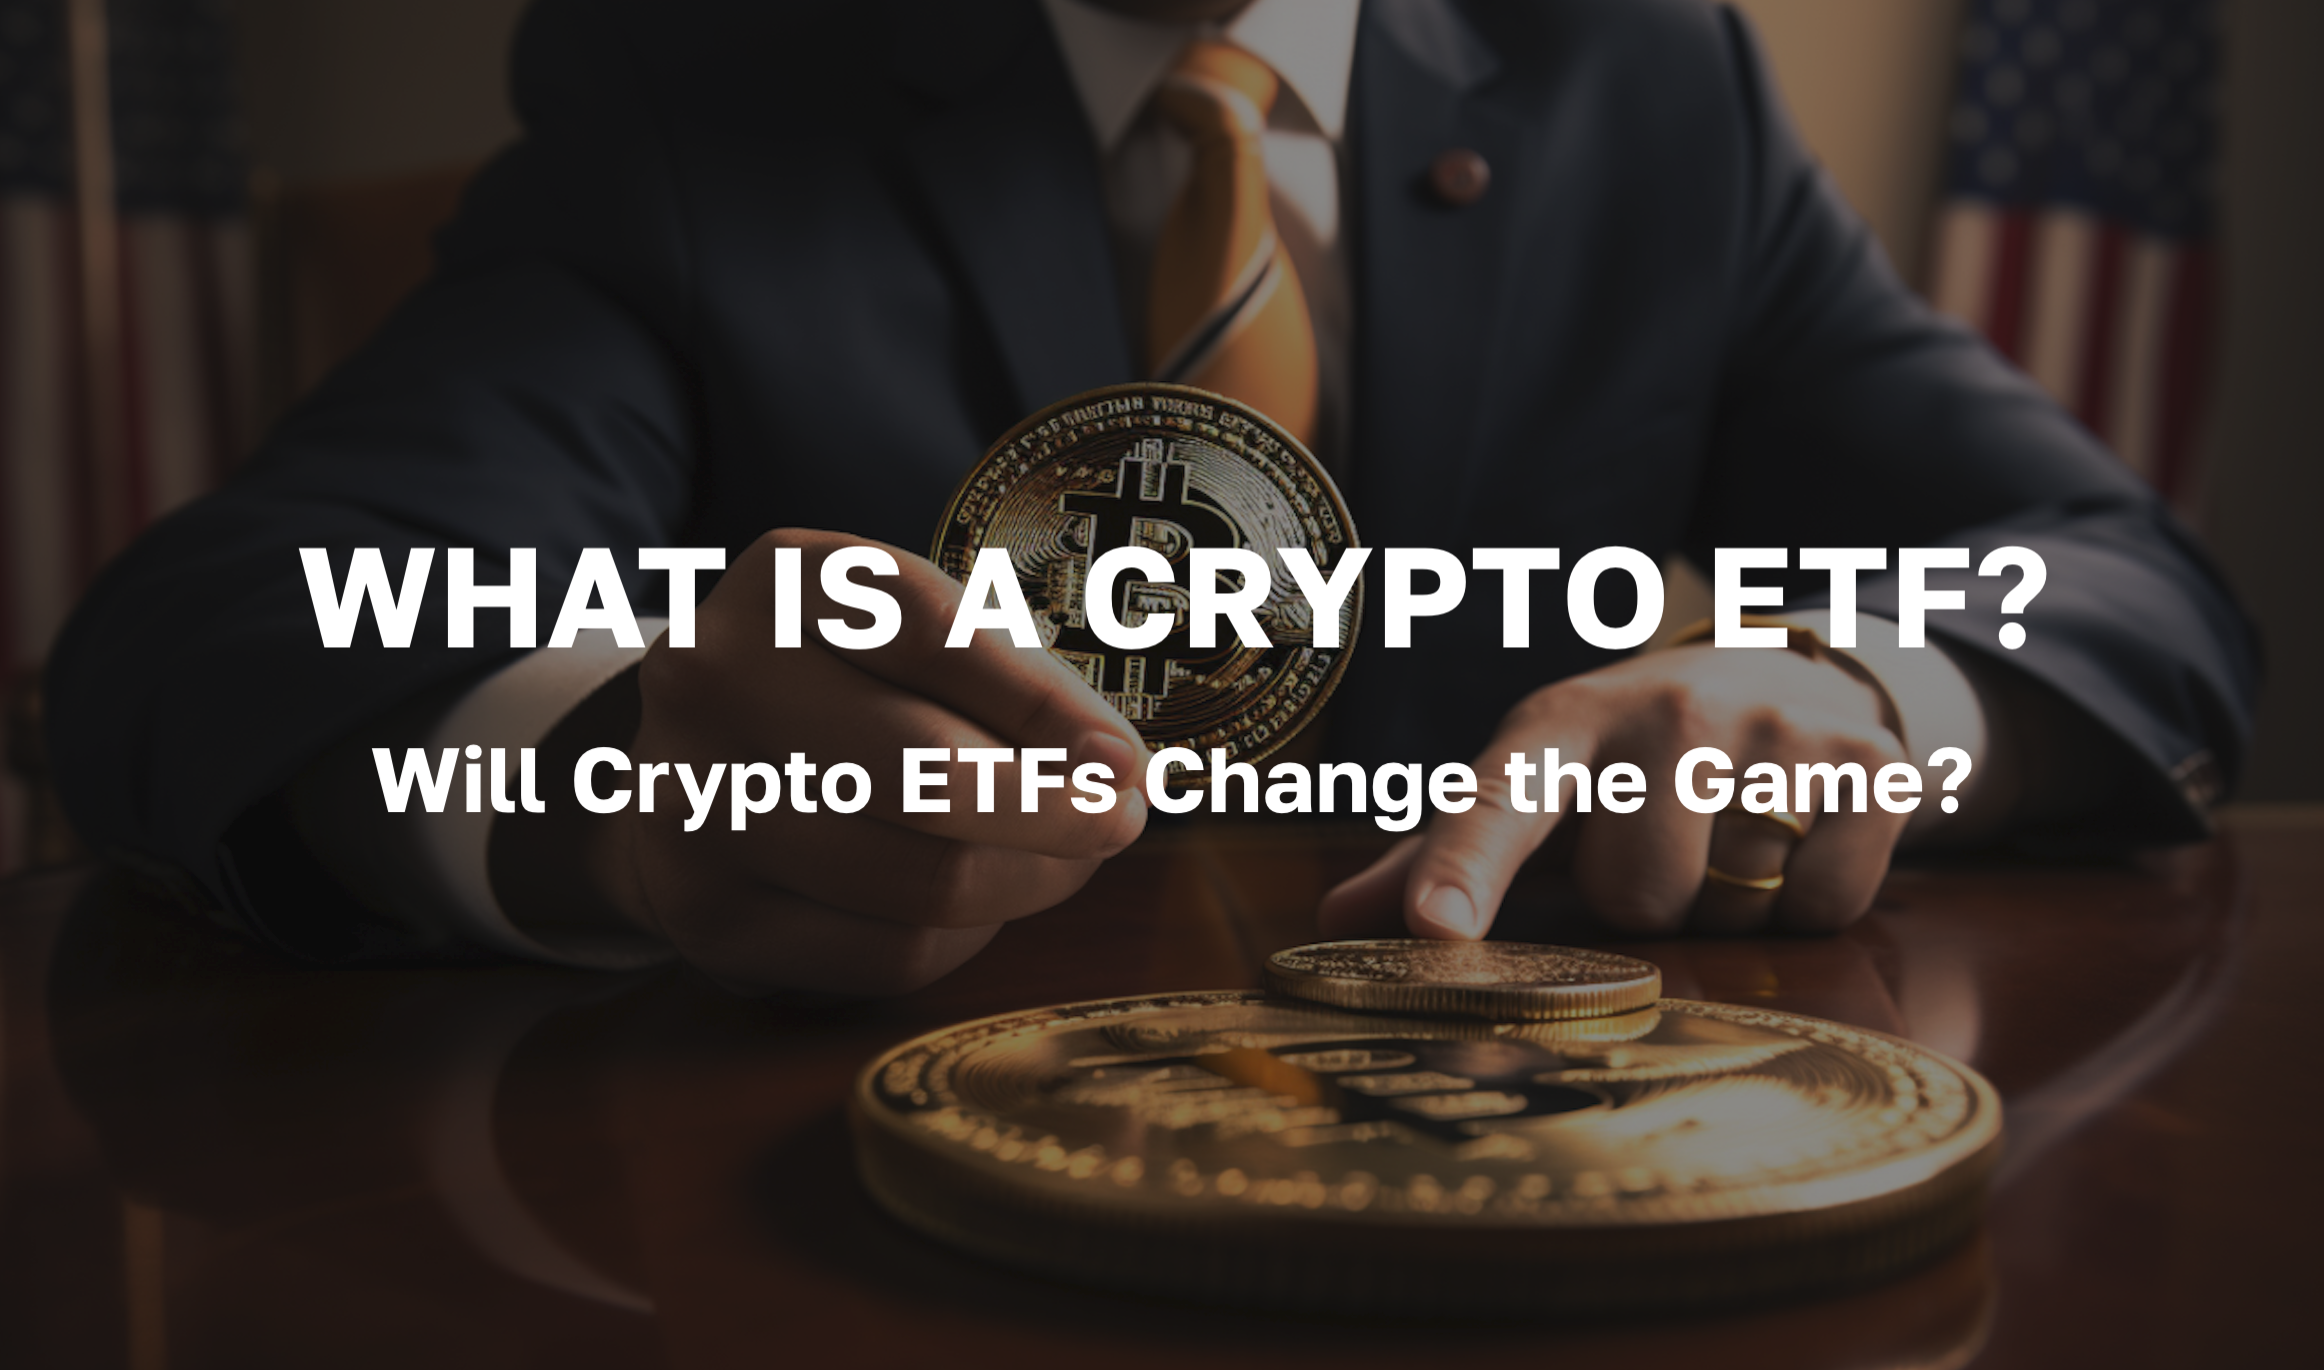 SEC Chair Gensler Looking at Crypto ETF applications - Approving a spot Bitcoin ETF